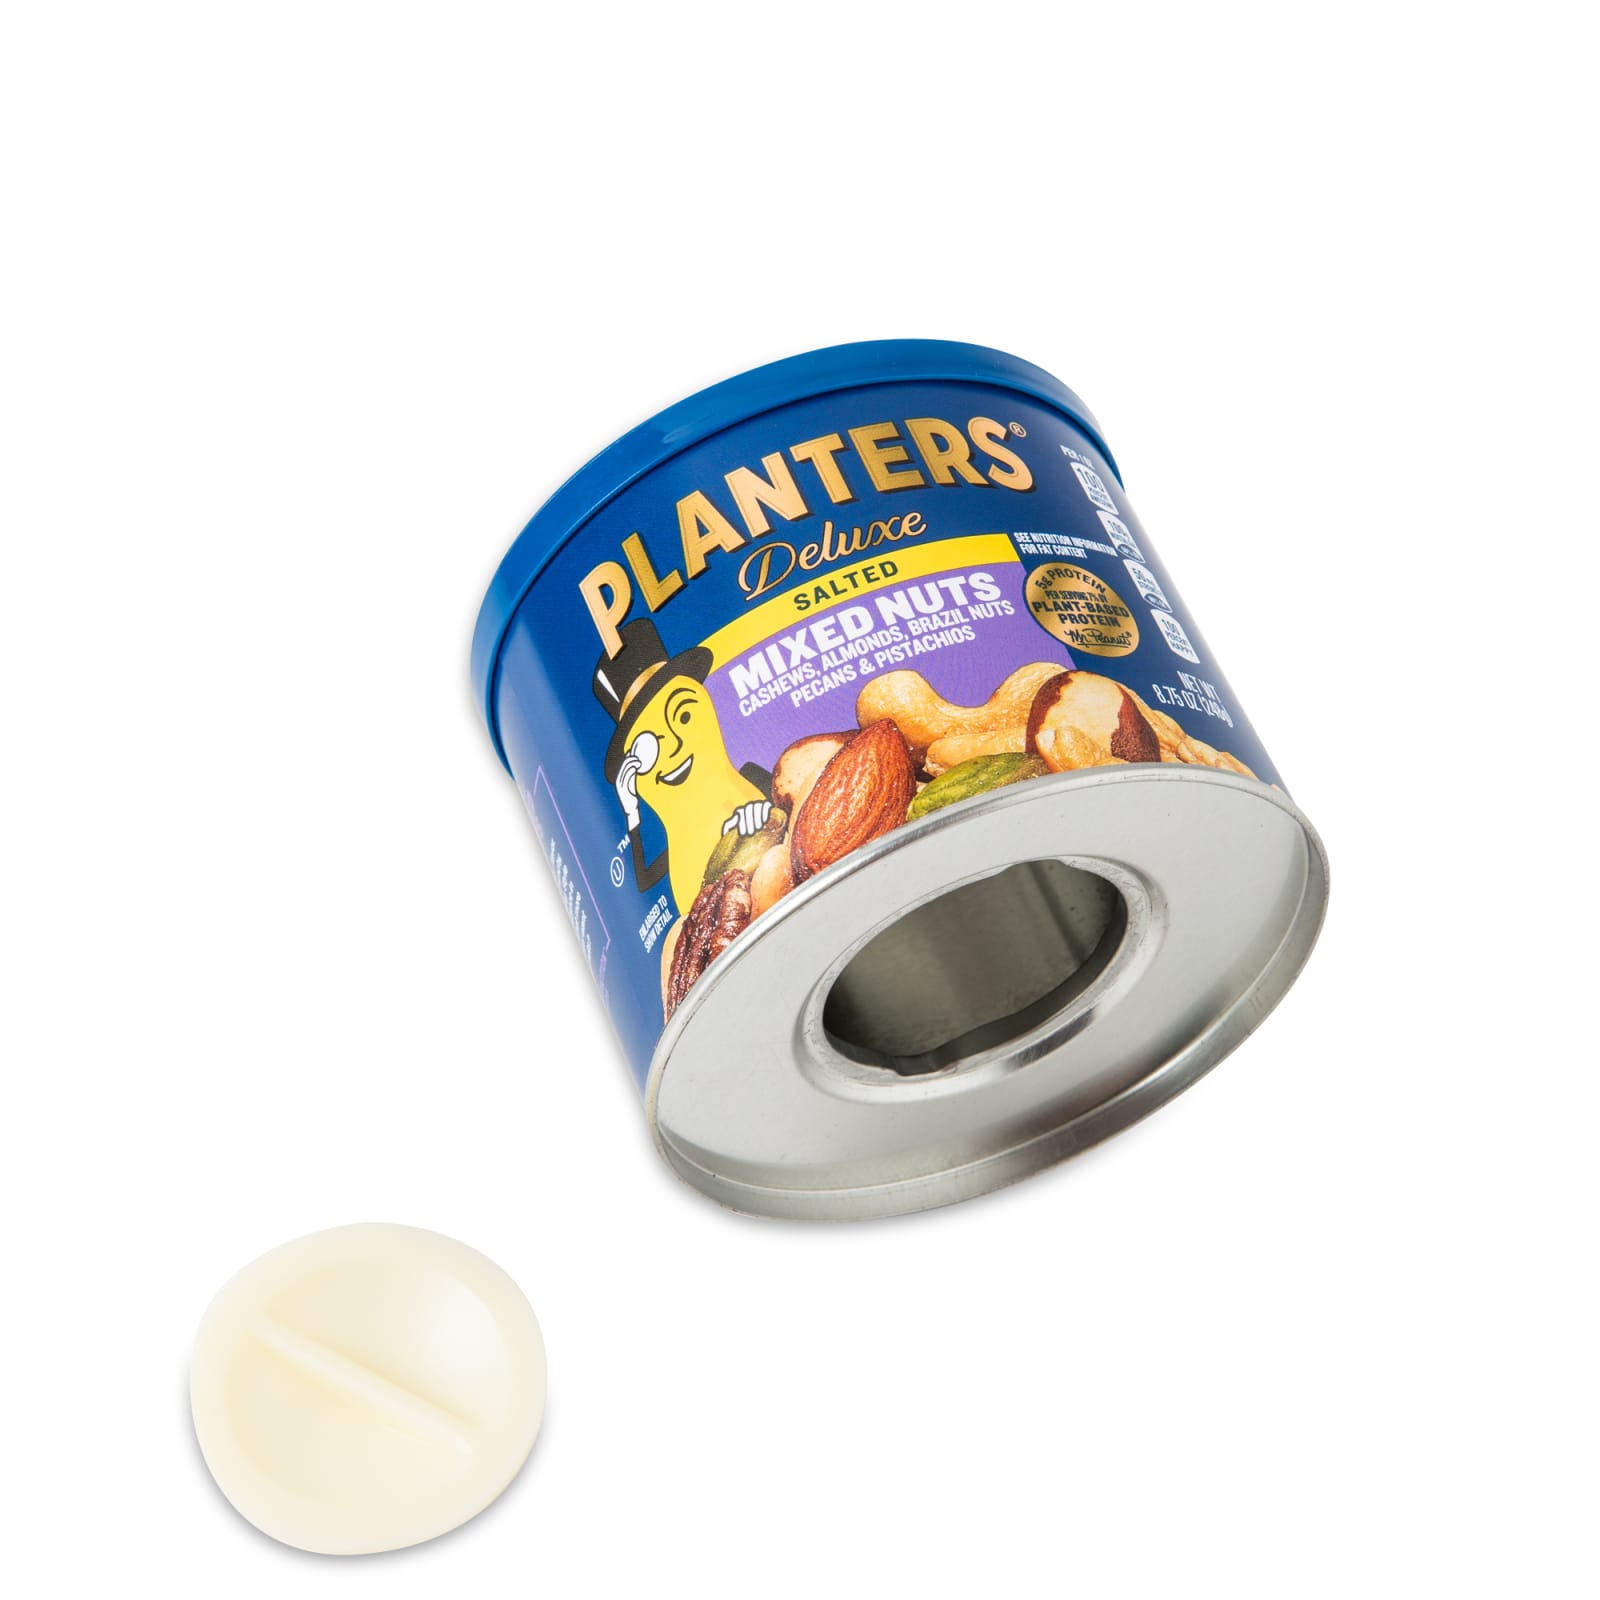 Planters Can Safe